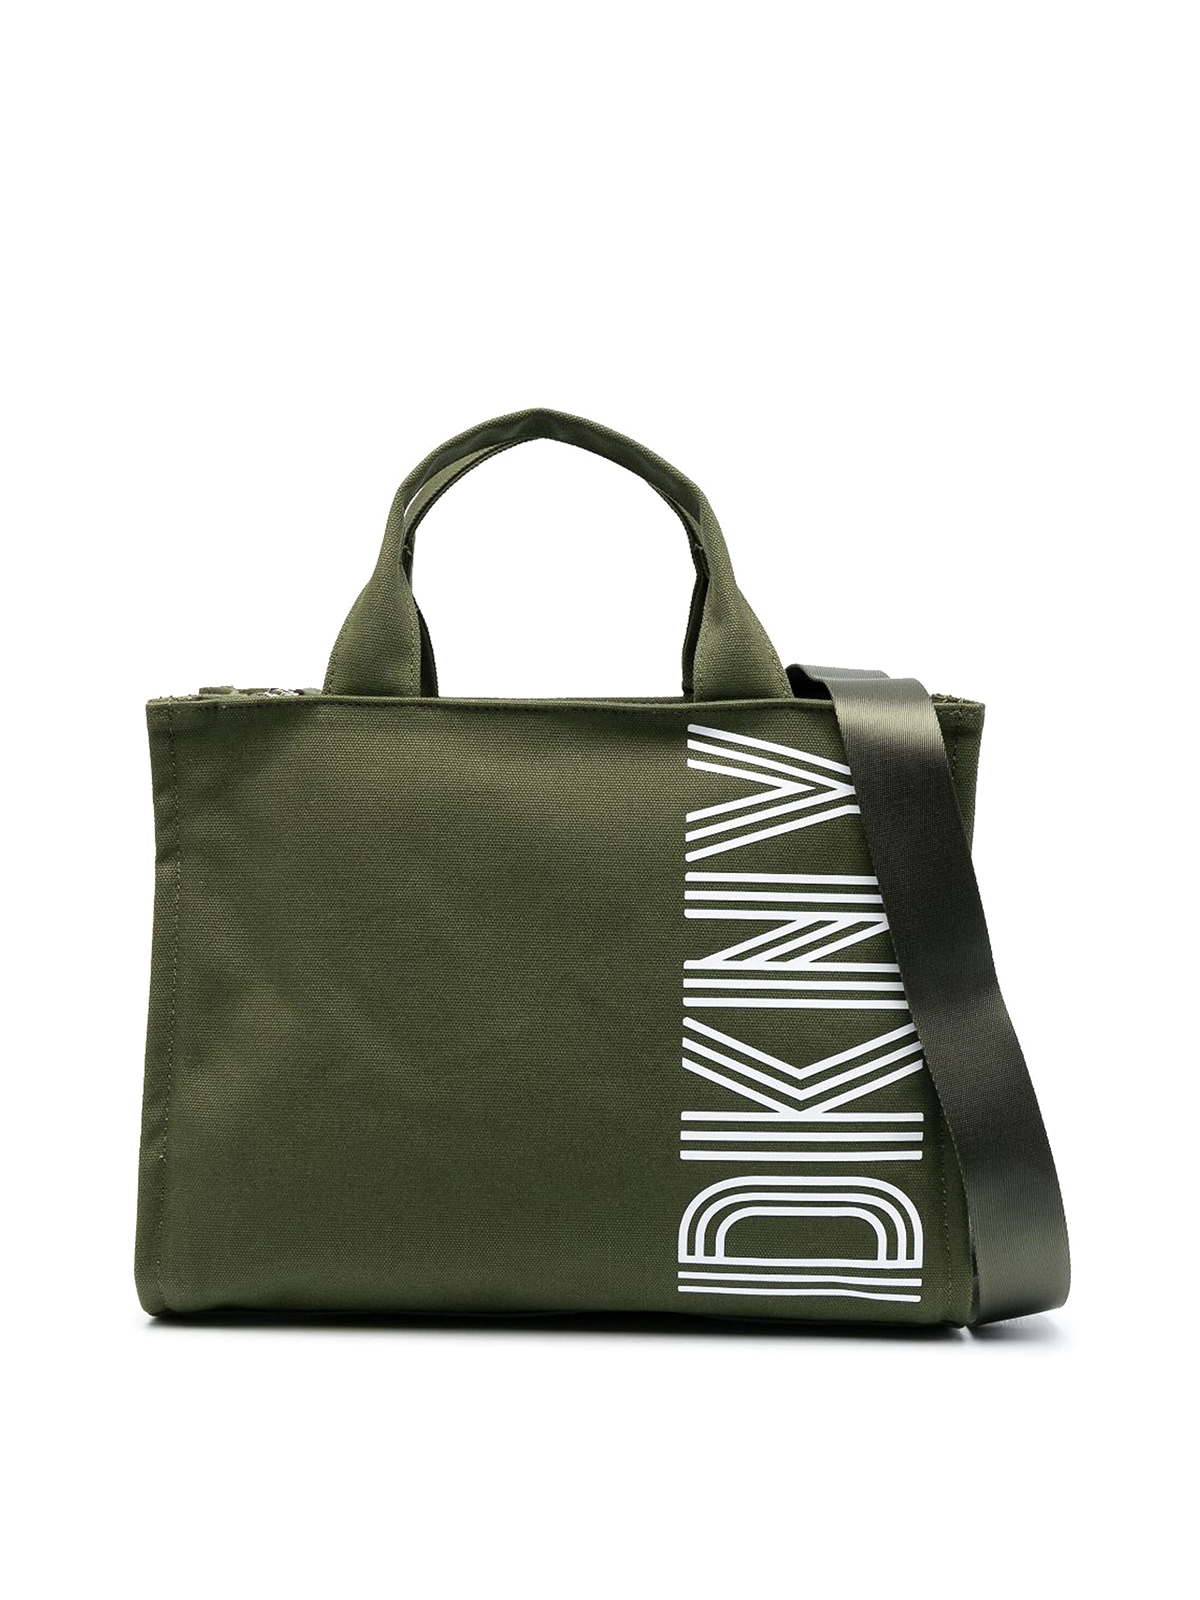 DKNY Bags Sale, Up To 70% Off